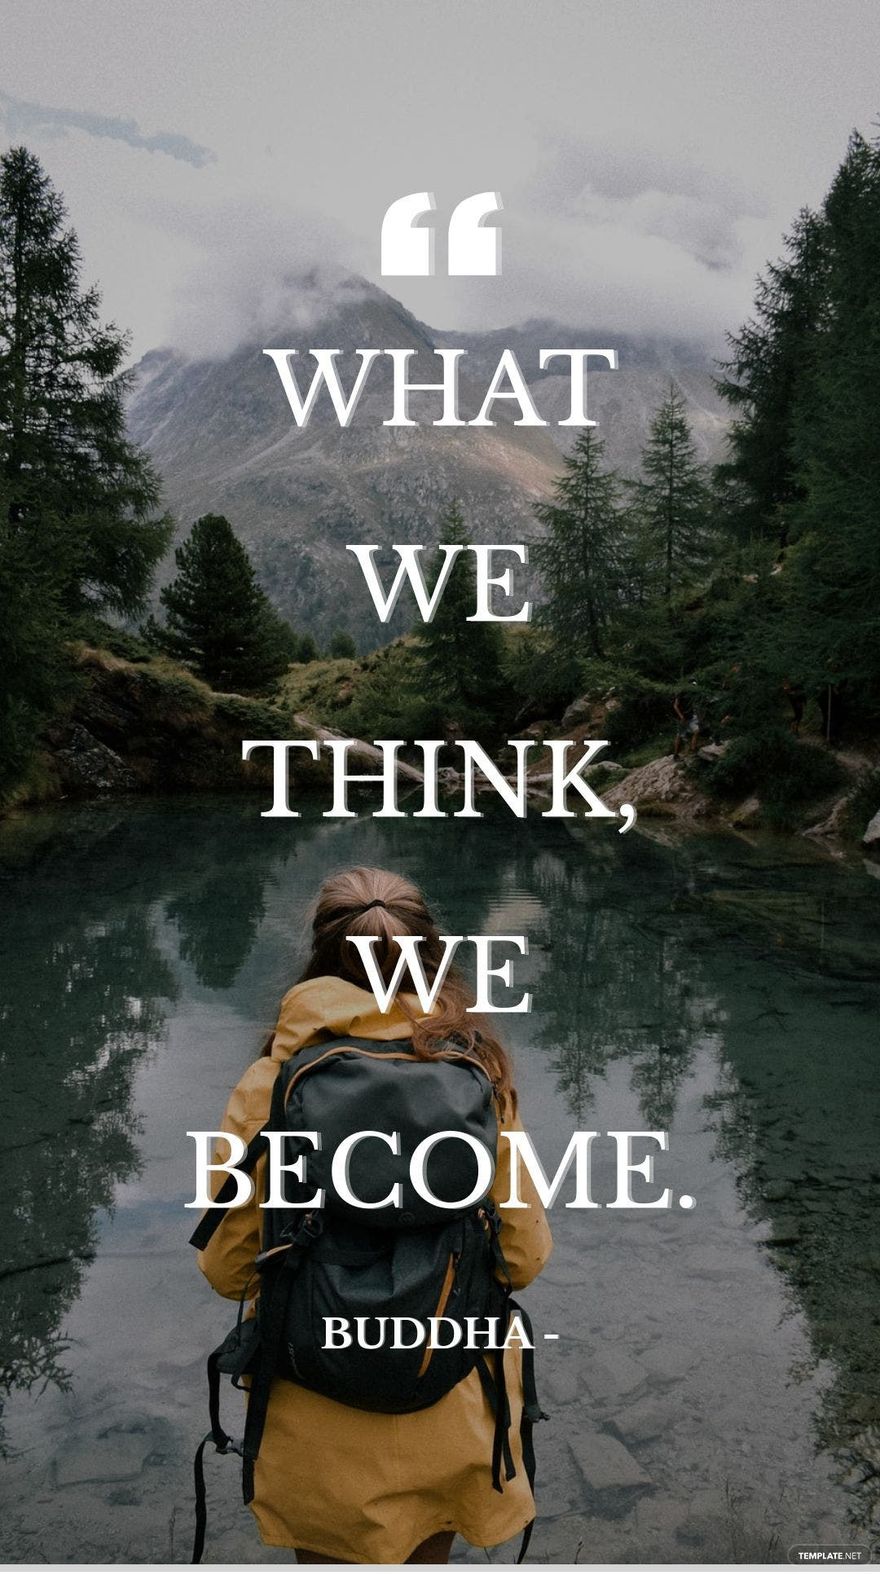 Buddha - What we think, we become.